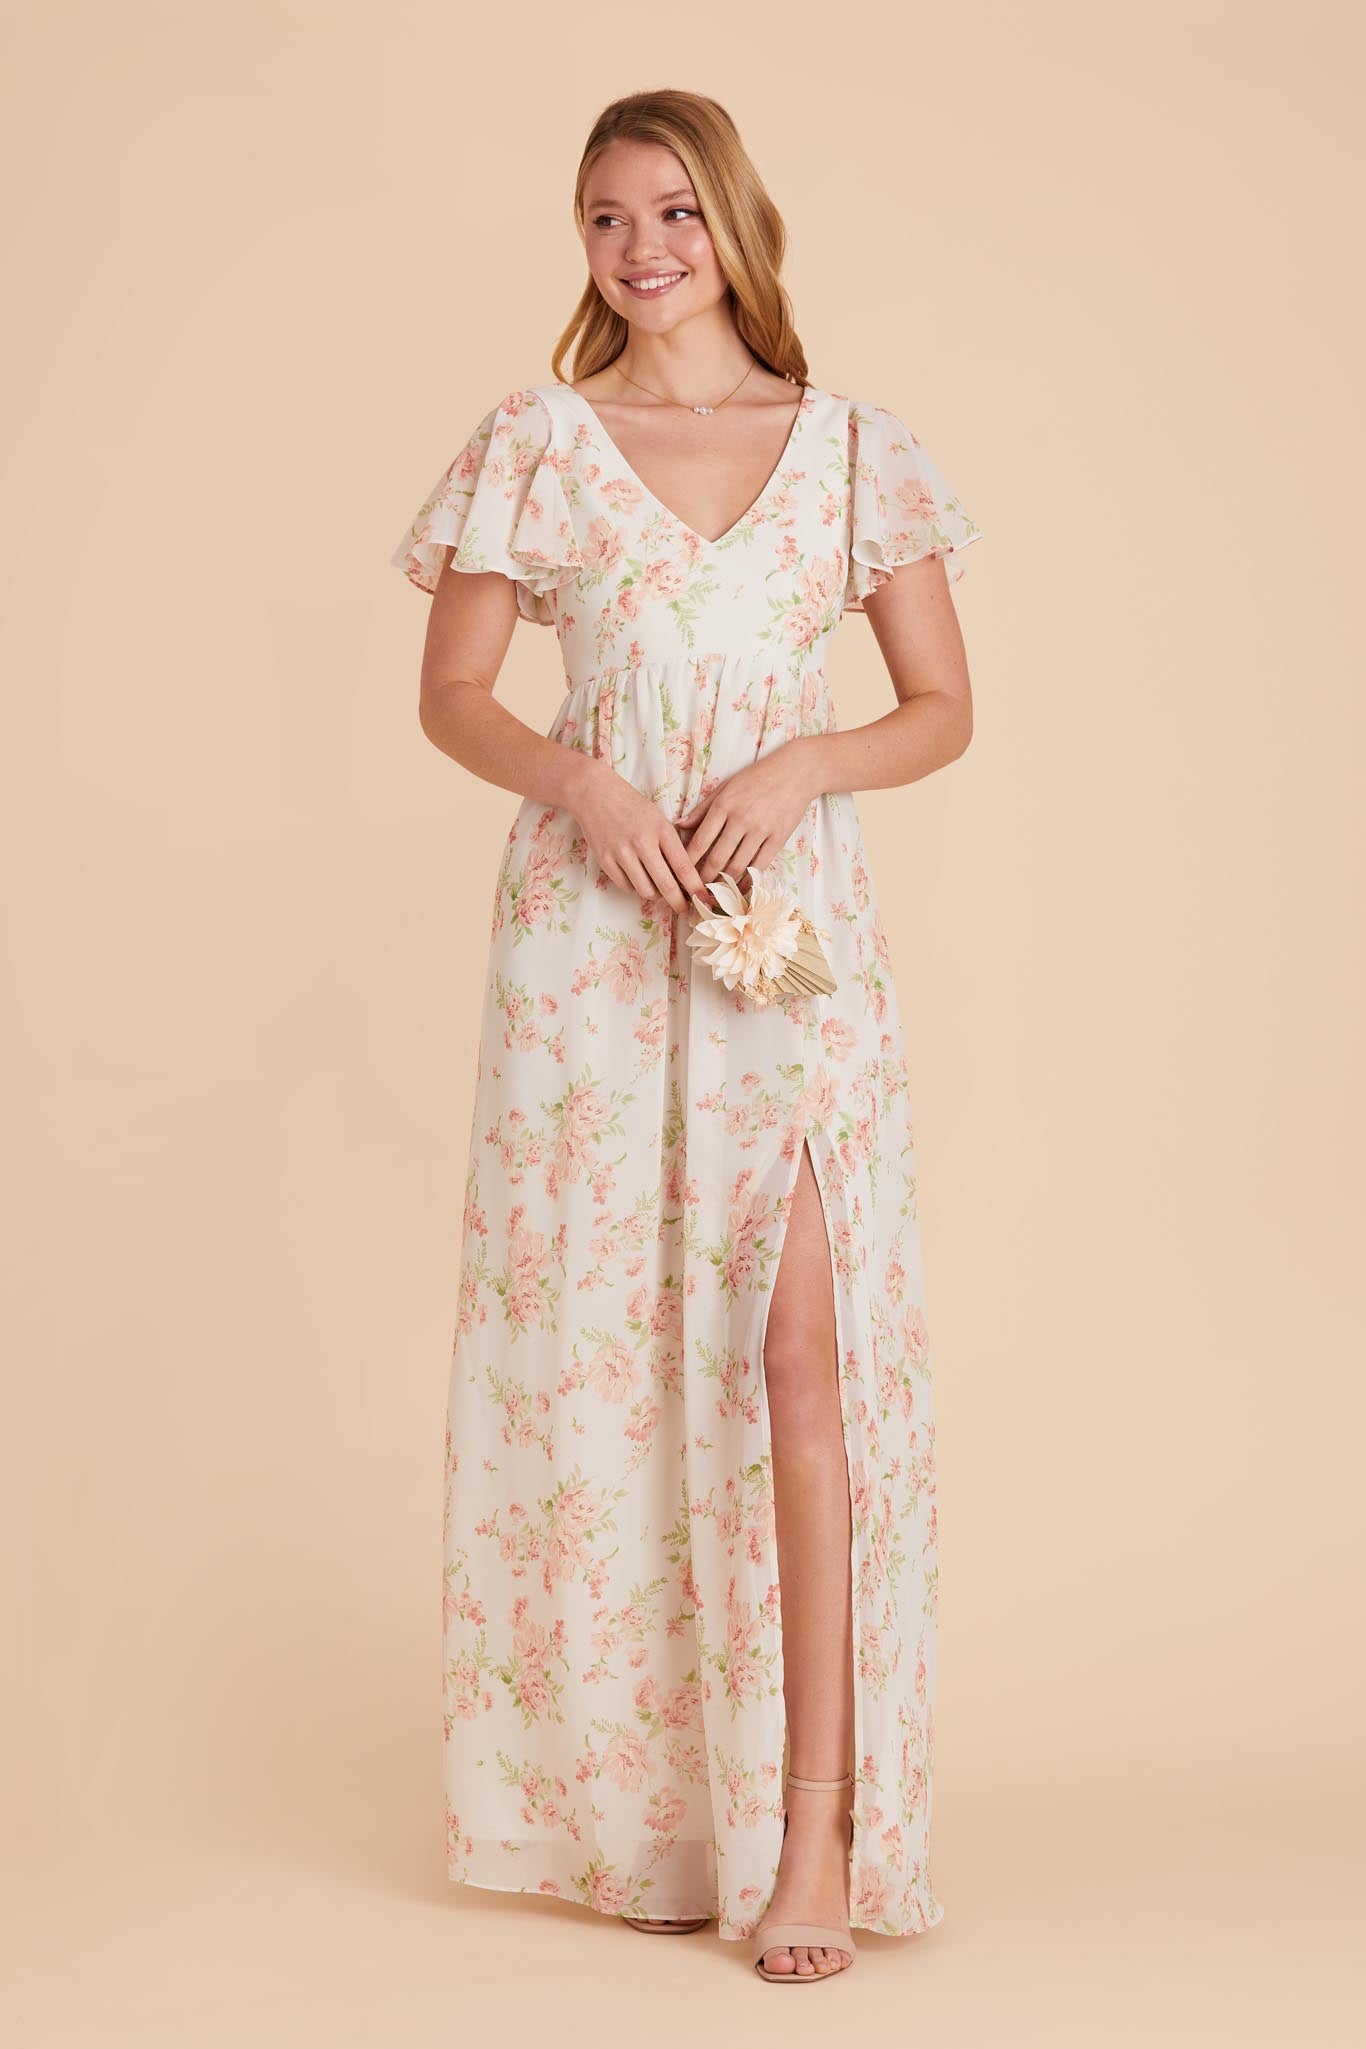 Whimsical Blooms Hannah Empire Dress by Birdy Grey